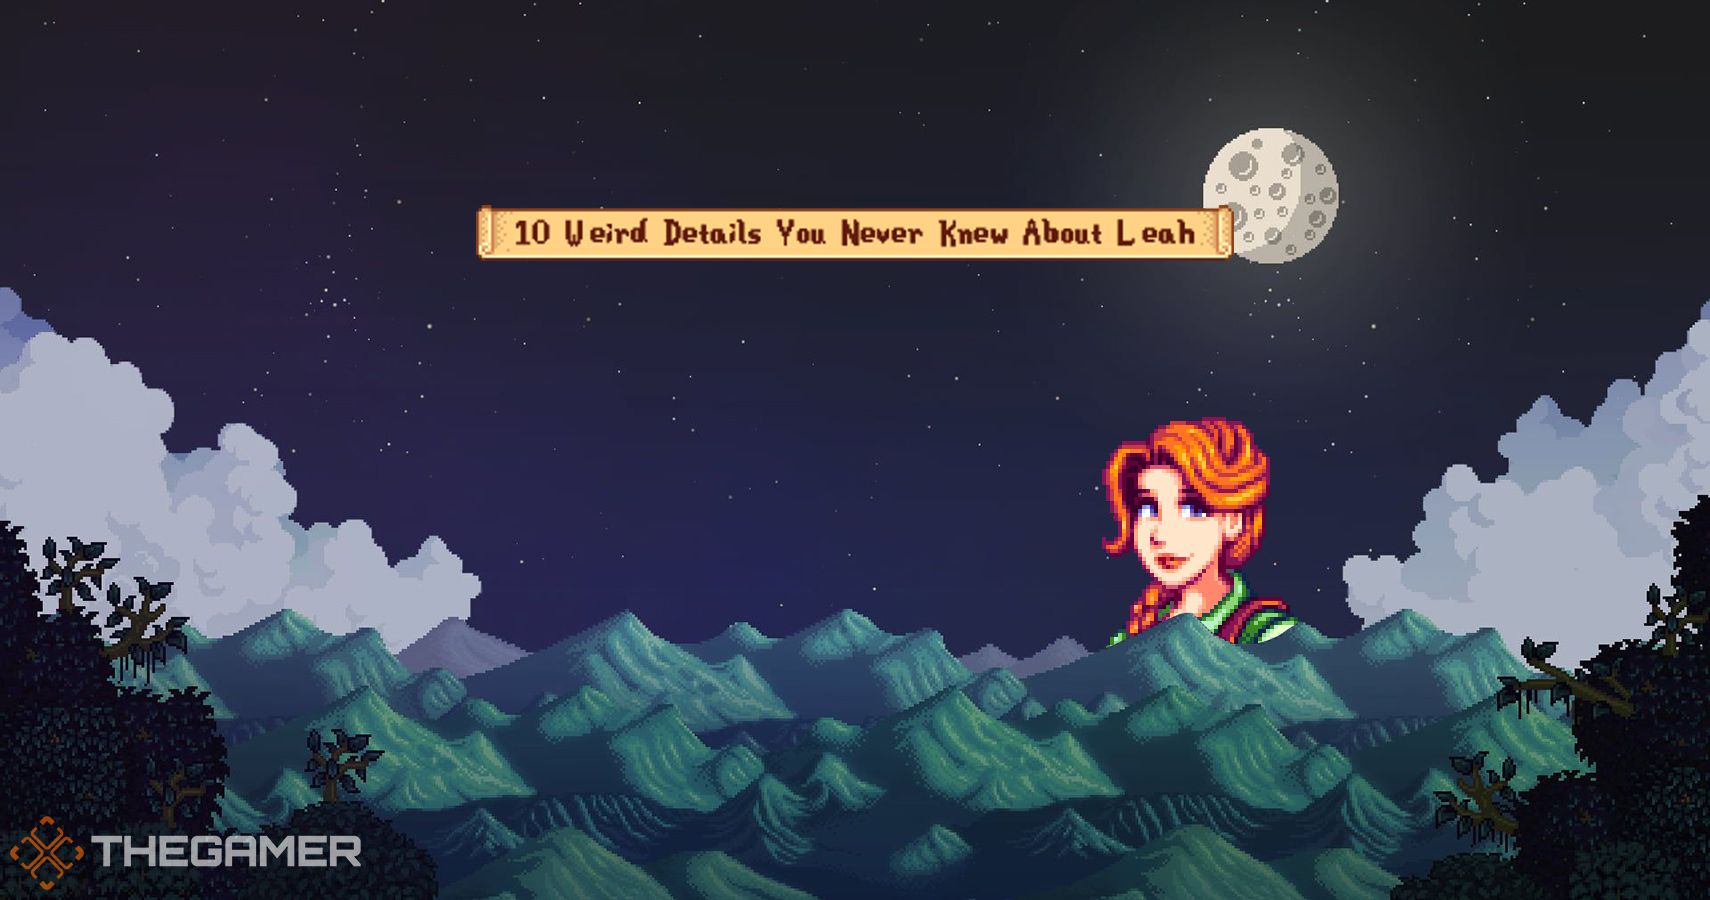 Stardew Valley 10 Weird Details You Never Knew About Leah 